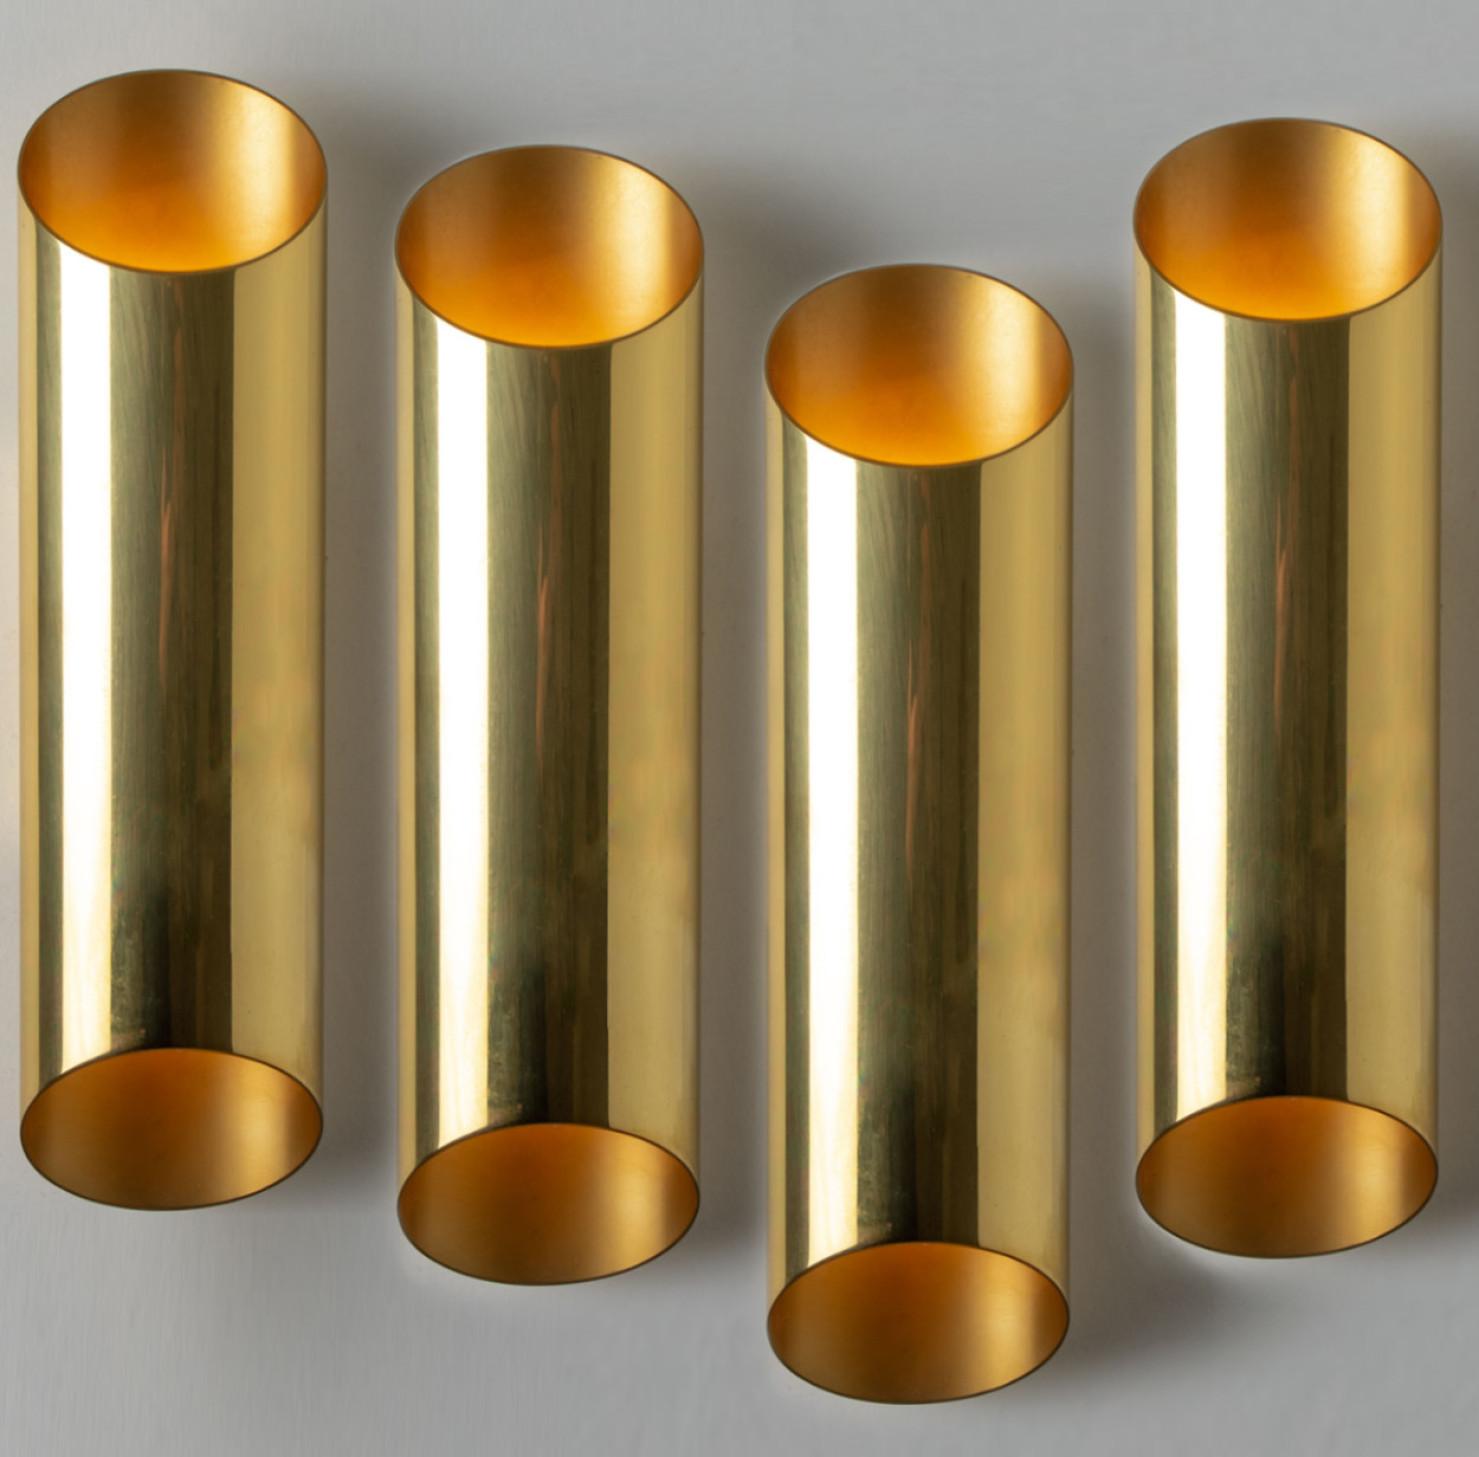 1 of the 4 Amazing wall sconces in the style of Nanda Vigo.
Full brass pieces. The lights require 2 E14 light bulbs.

Please note the price is for 1 piece. We have 4 pieces available.

High end quality, in excellent condition, cleaned,